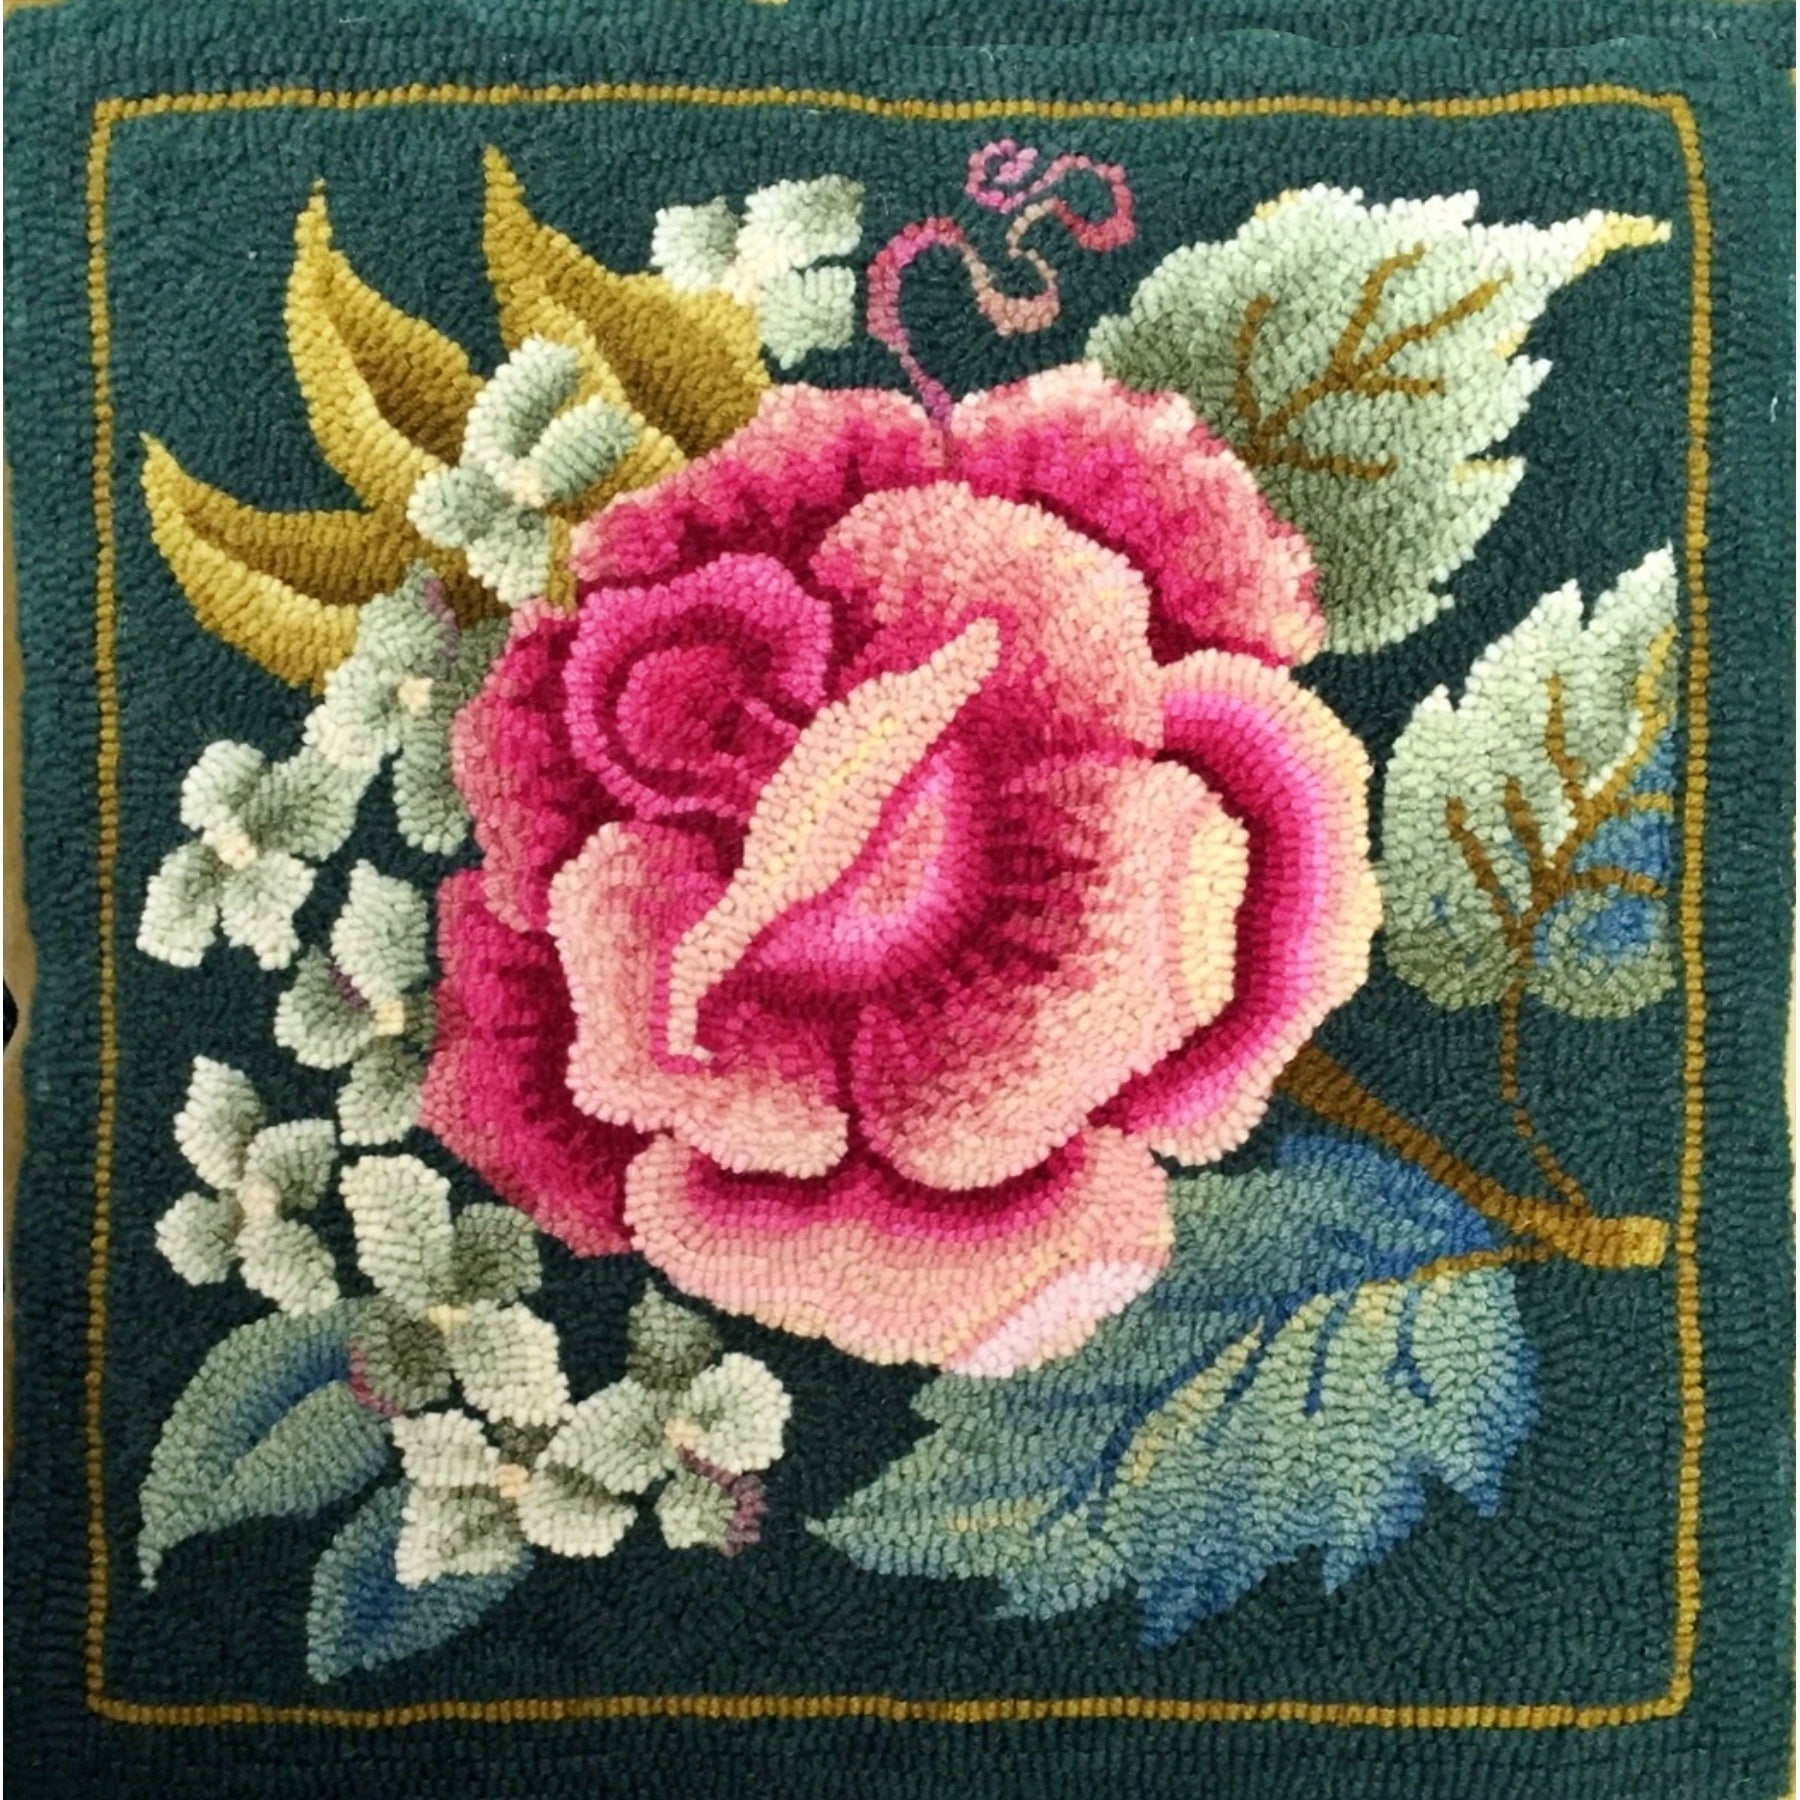 Rapture – Rose and Hydrangea, rug hooked by Marg Miller